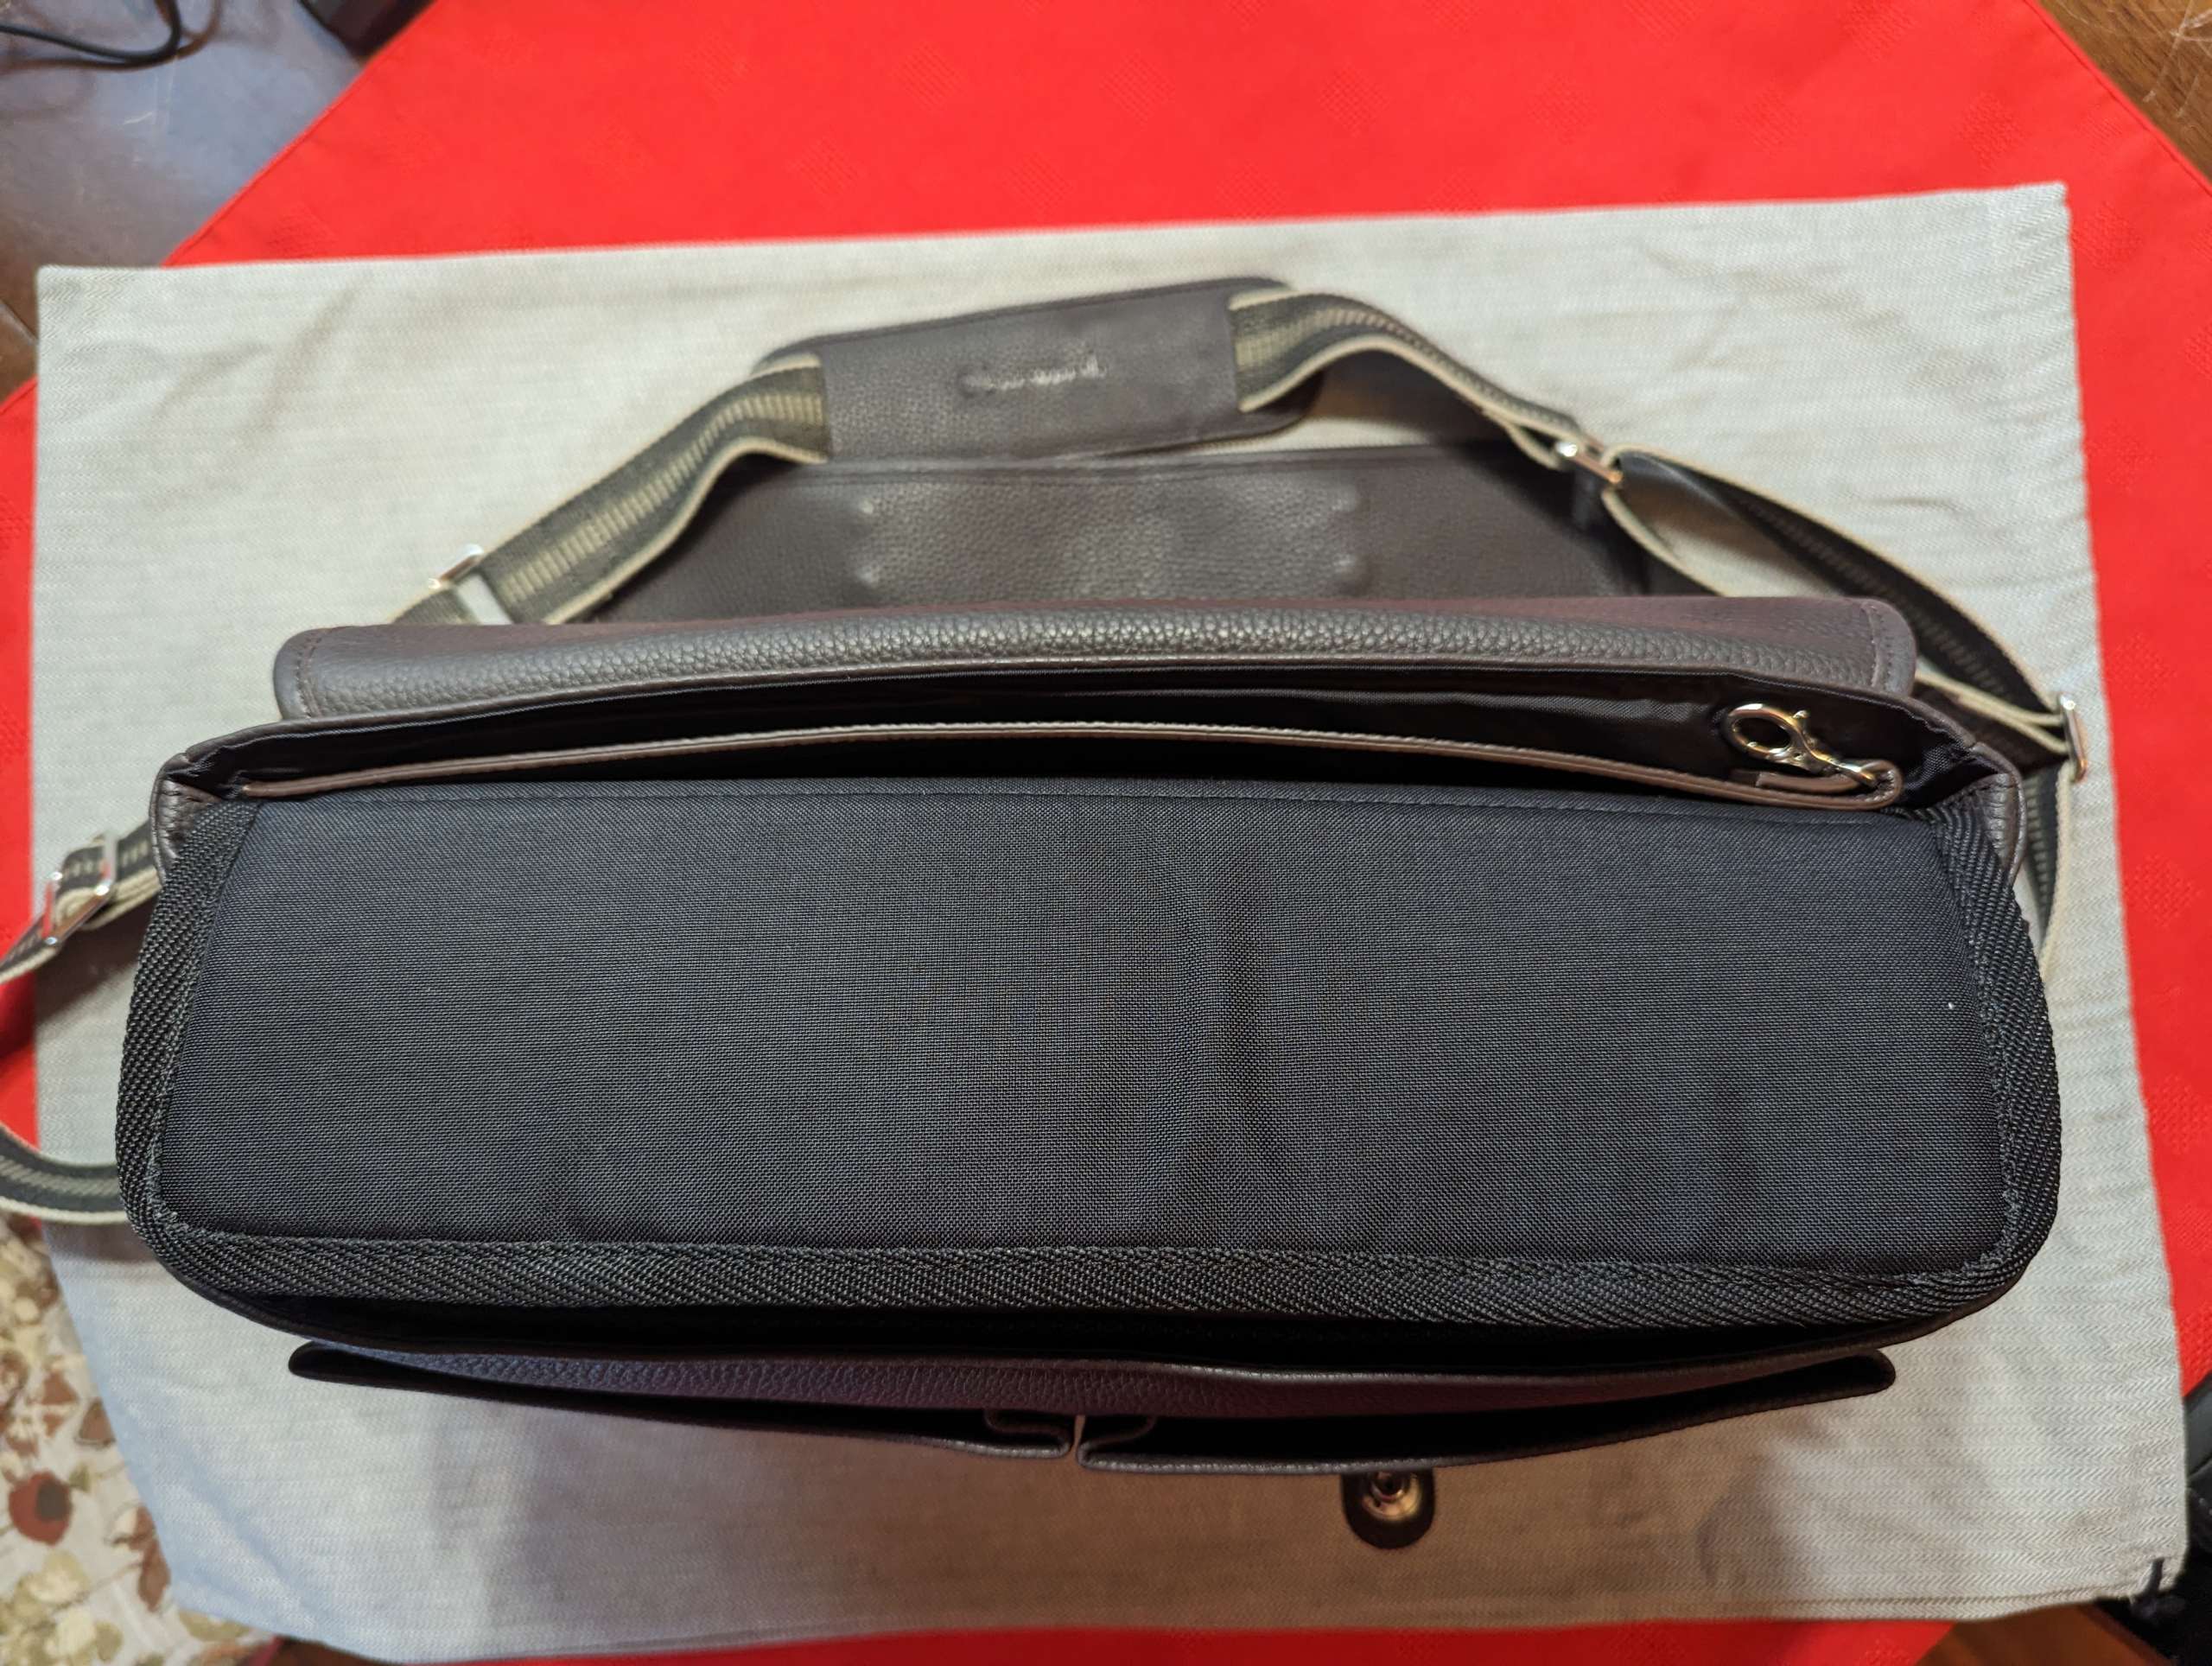 Oberwerth William Camera and Messenger Bag review - a timeless classic ...